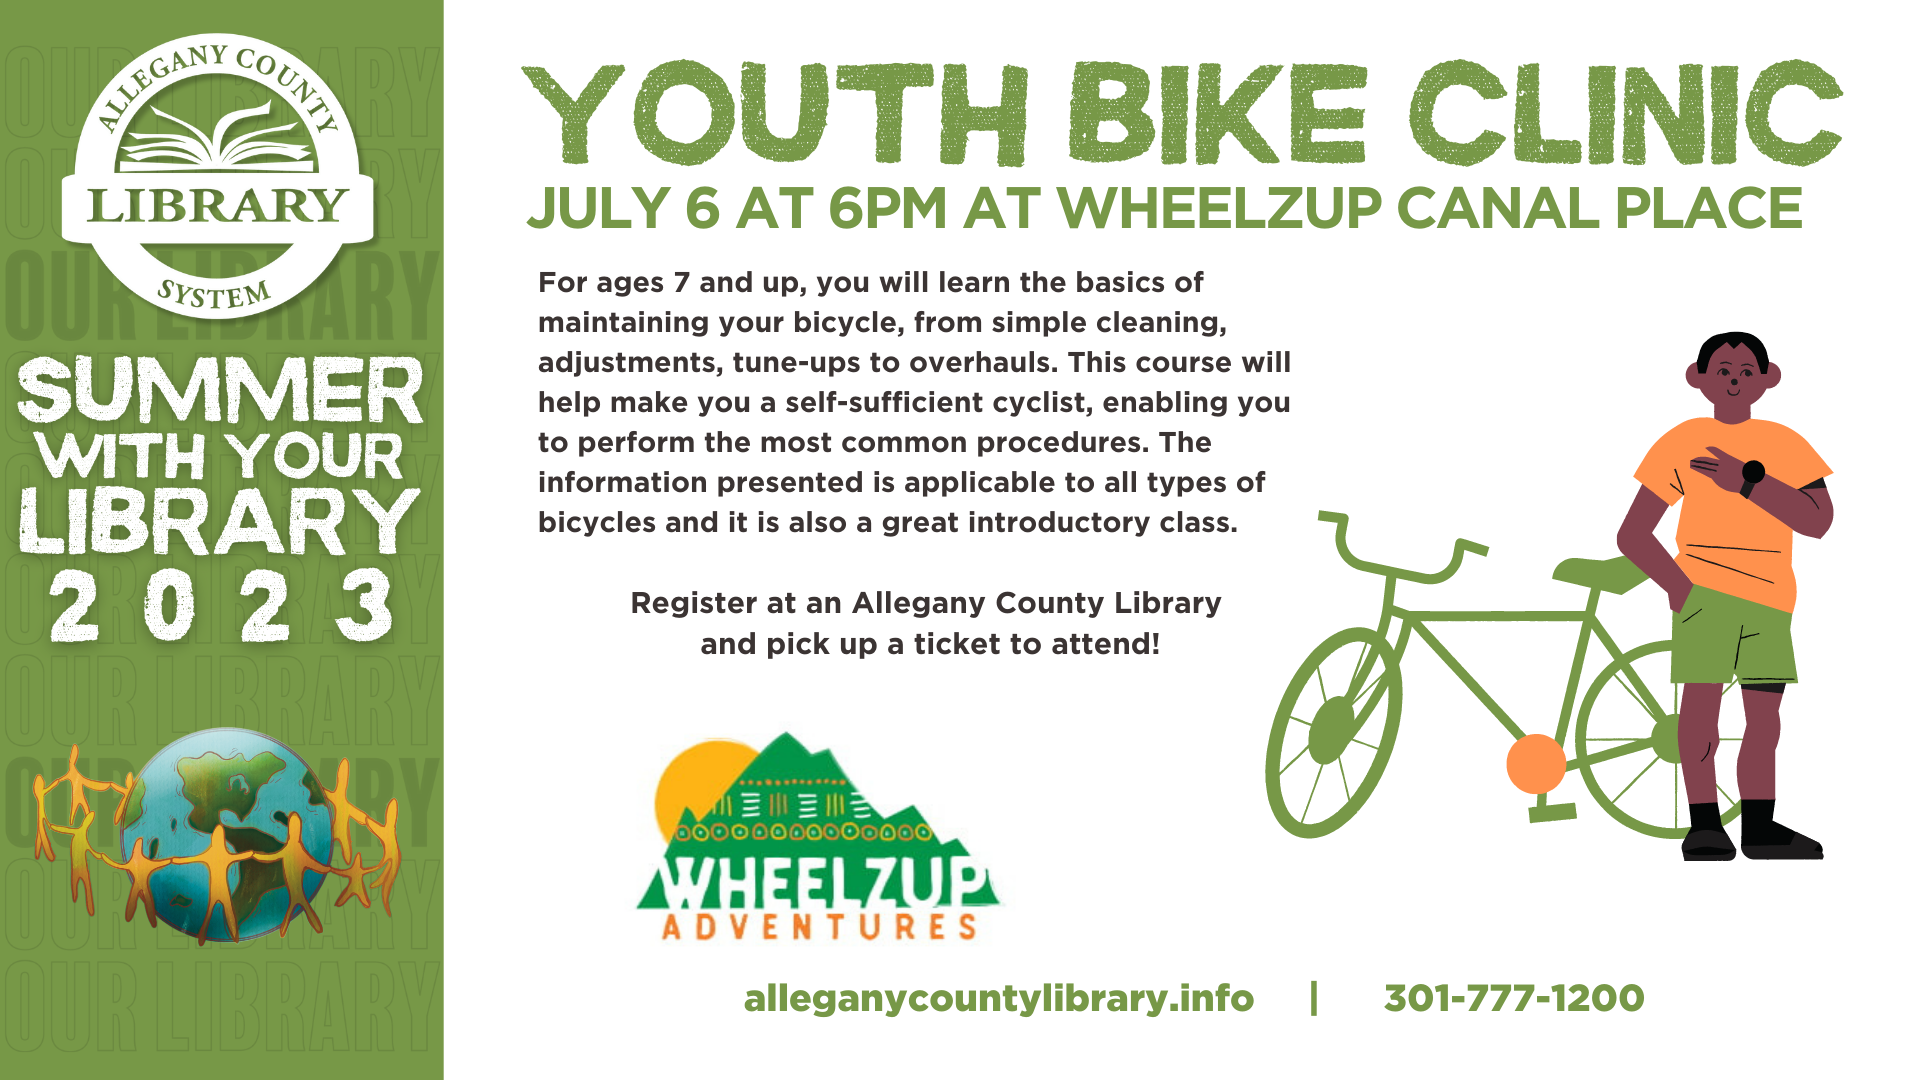 youth bike clinic event details